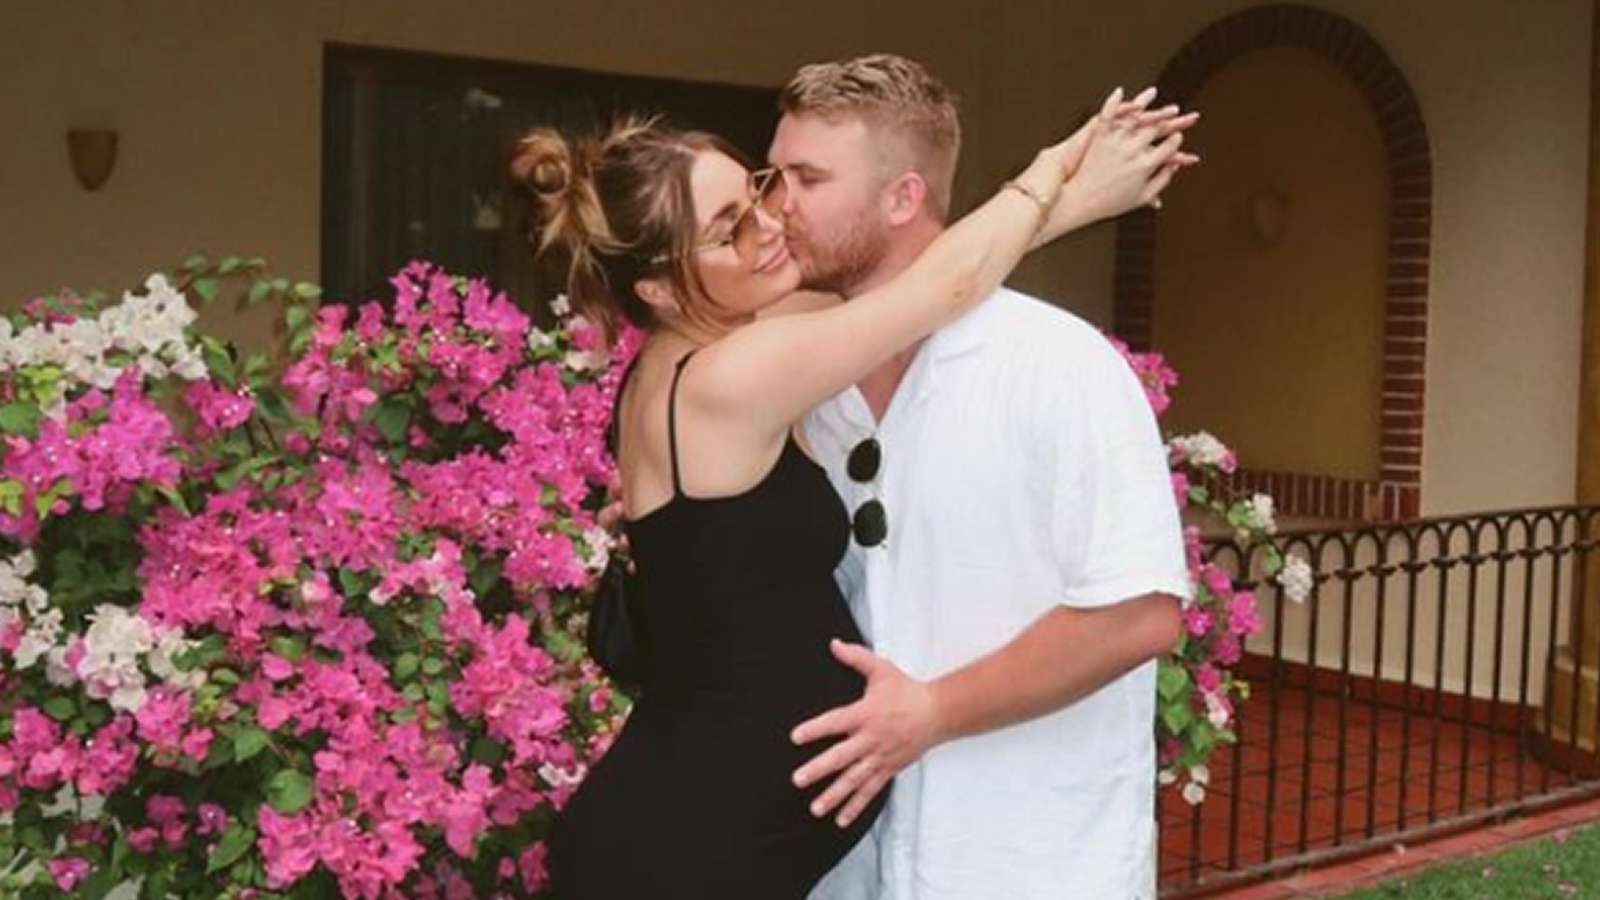 YouTuber Aspyn Ovard files for divorce after third baby with Parker Ferris